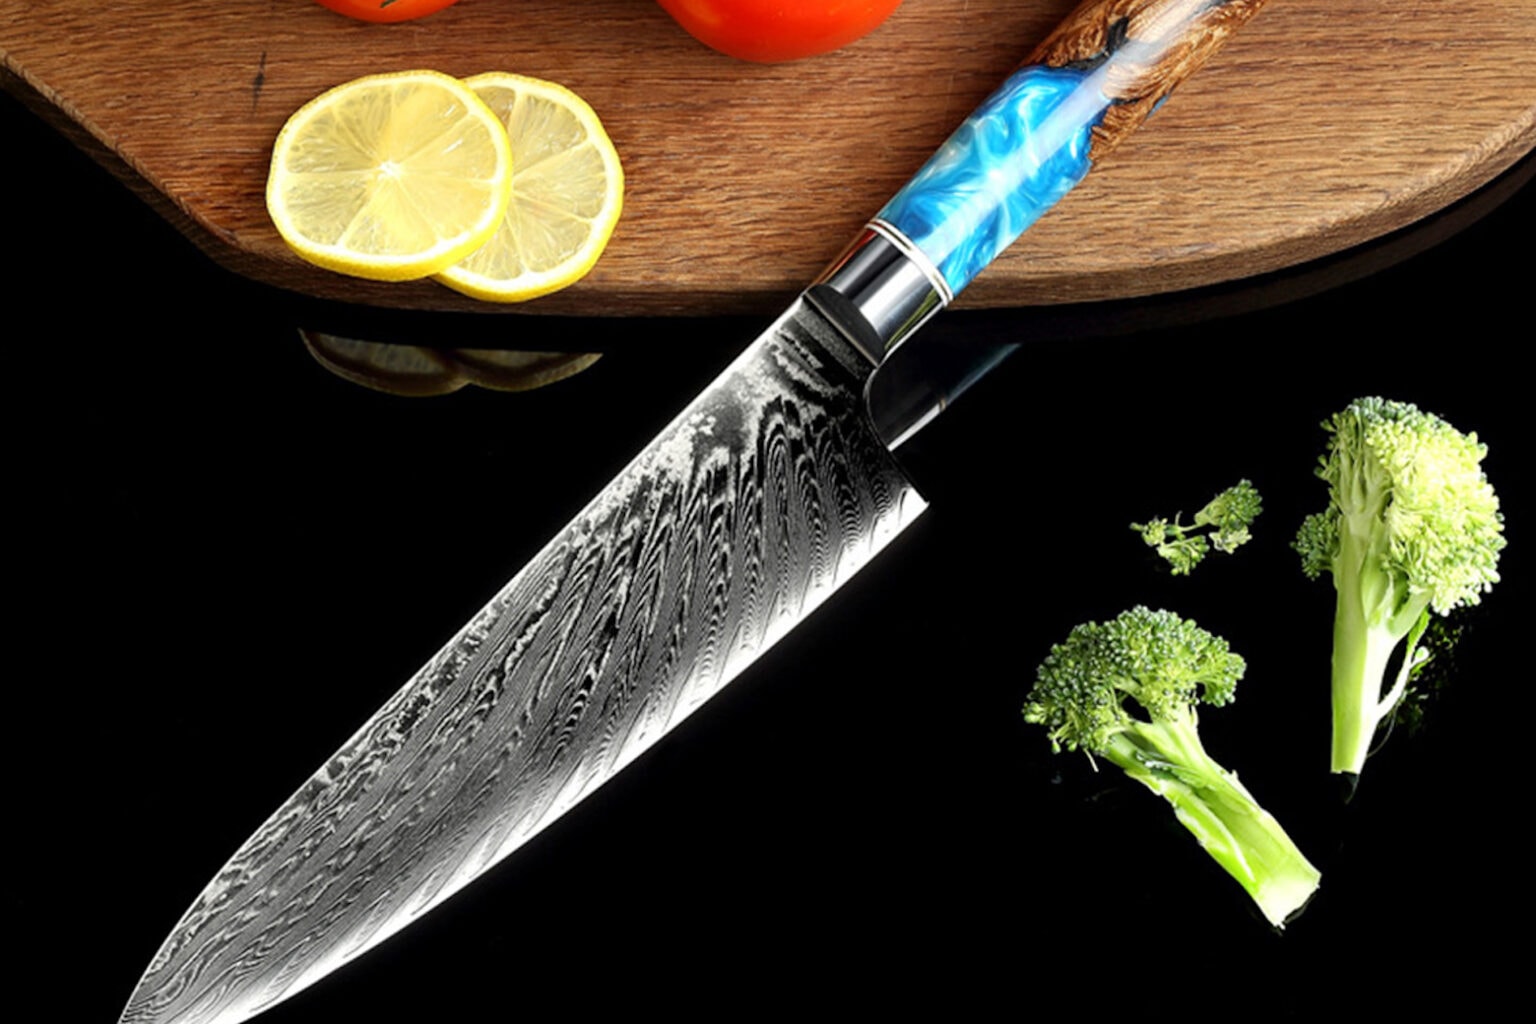 Get Dad this traditional Japanese kitchen knife for under $80.